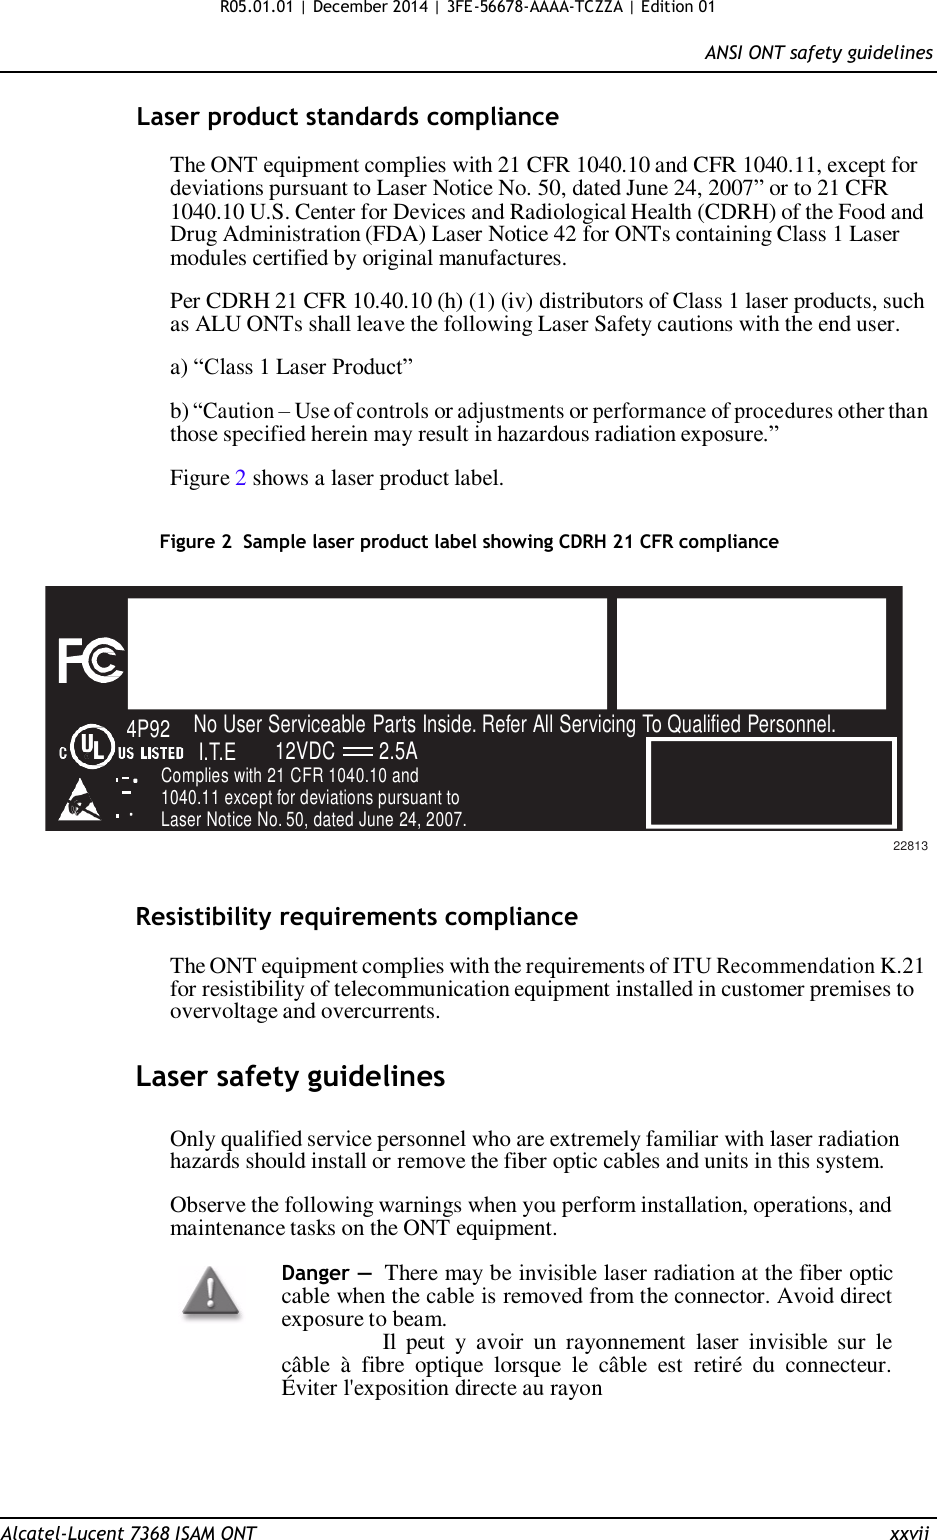 R05.01.01 | December 2014 | 3FE-56678-AAAA-TCZZA | Edition 01  ANSI ONT safety guidelines   Laser product standards compliance  The ONT equipment complies with 21 CFR 1040.10 and CFR 1040.11, except for deviations pursuant to Laser Notice No. 50, dated June 24, 2007” or to 21 CFR 1040.10 U.S. Center for Devices and Radiological Health (CDRH) of the Food and Drug Administration (FDA) Laser Notice 42 for ONTs containing Class 1 Laser modules certified by original manufactures.  Per CDRH 21 CFR 10.40.10 (h) (1) (iv) distributors of Class 1 laser products, such as ALU ONTs shall leave the following Laser Safety cautions with the end user.  a) “Class 1 Laser Product”  b) “Caution – Use of controls or adjustments or performance of procedures other than those specified herein may result in hazardous radiation exposure.”  Figure 2 shows a laser product label.   Figure 2  Sample laser product label showing CDRH 21 CFR compliance        4P92 No User Serviceable Parts Inside. Refer All Servicing To Qualified Personnel. I.T.E 12VDC 2.5A Complies with 21 CFR 1040.10 and 1040.11 except for deviations pursuant to Laser Notice No. 50, dated June 24, 2007.    22813   Resistibility requirements compliance  The ONT equipment complies with the requirements of ITU Recommendation K.21 for resistibility of telecommunication equipment installed in customer premises to overvoltage and overcurrents.   Laser safety guidelines   Only qualified service personnel who are extremely familiar with laser radiation hazards should install or remove the fiber optic cables and units in this system.  Observe the following warnings when you perform installation, operations, and maintenance tasks on the ONT equipment.  Danger — There may be invisible laser radiation at the fiber optic cable when the cable is removed from the connector. Avoid direct exposure to beam.                 Il  peut  y  avoir  un  rayonnement  laser  invisible  sur  le câble  à  fibre  optique  lorsque  le  câble  est  retiré  du  connecteur. Éviter l&apos;exposition directe au rayon       Alcatel-Lucent 7368 ISAM ONT  xxvii 